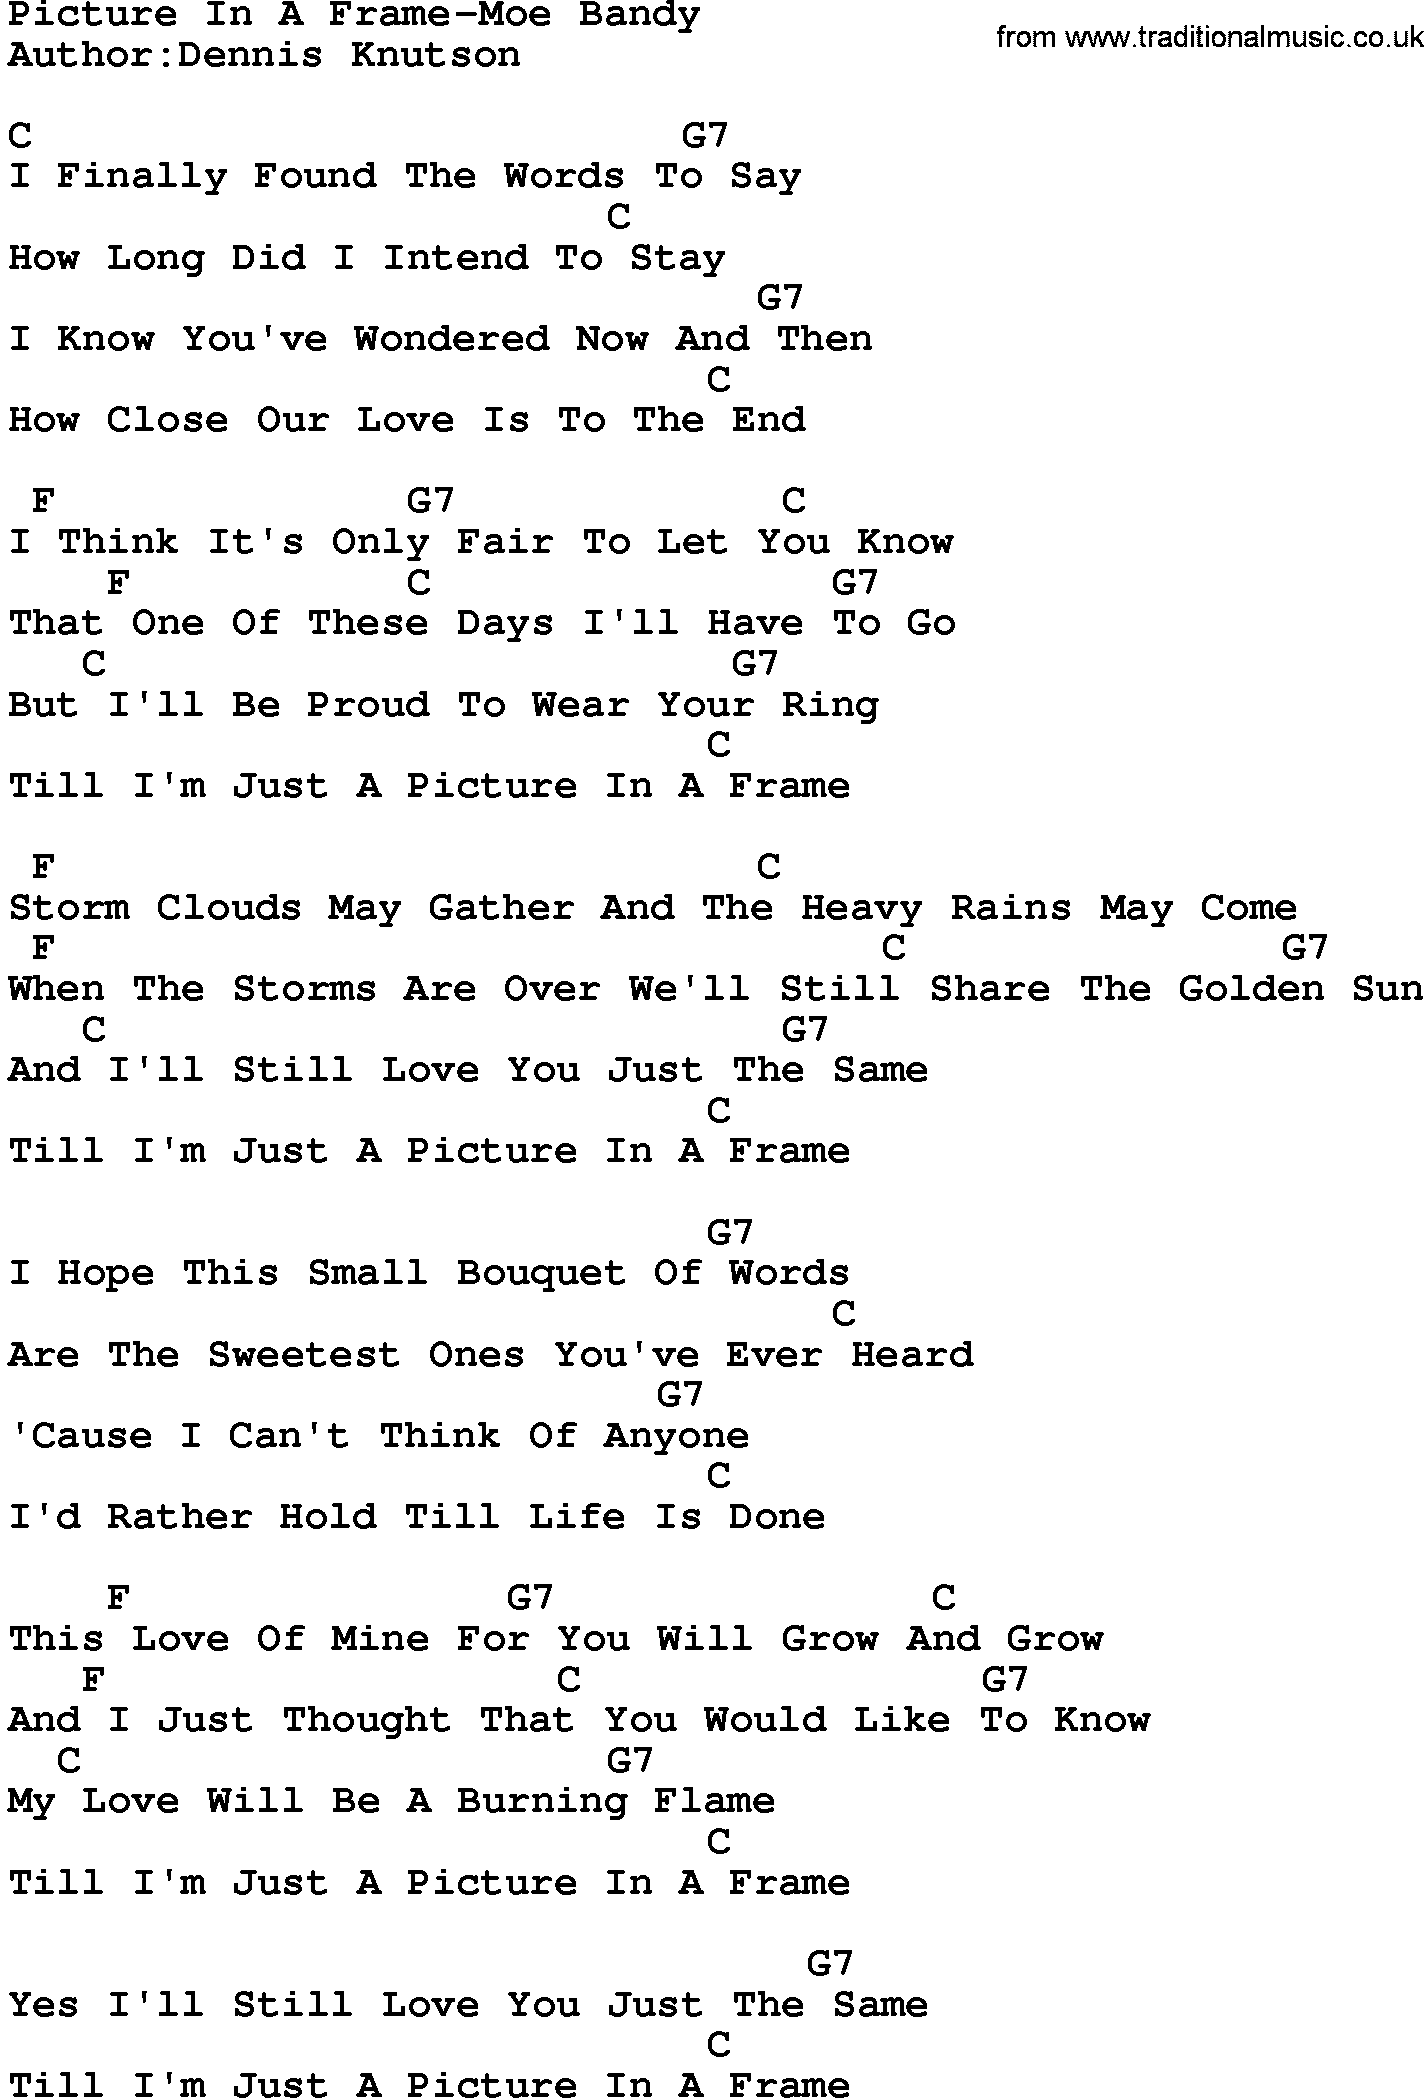 Country music song: Picture In A Frame-Moe Bandy lyrics and chords